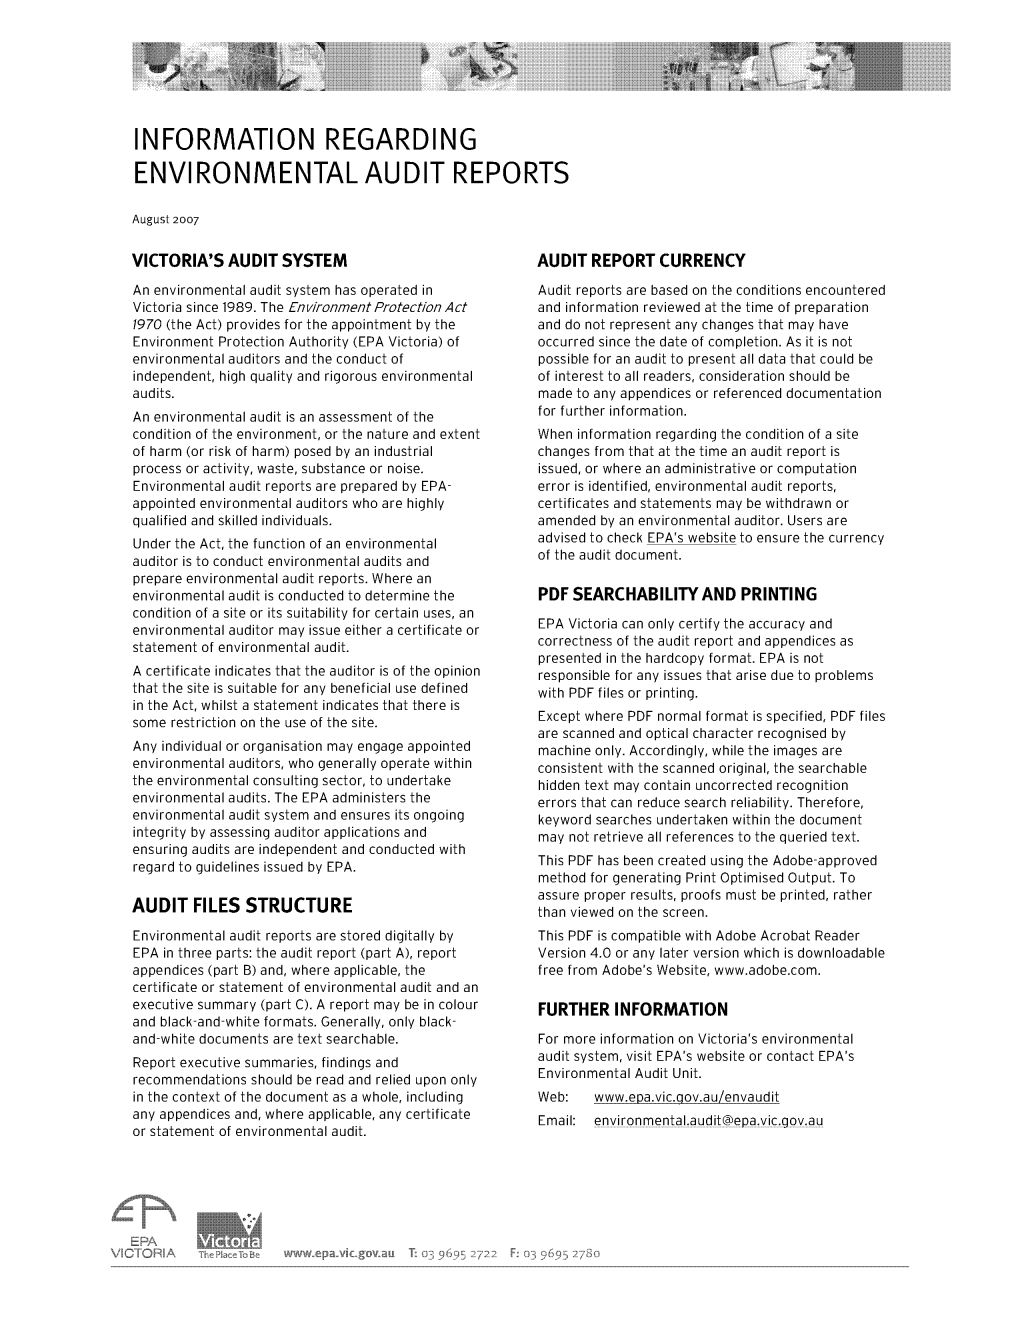 Summary of the Environmental Audit 1